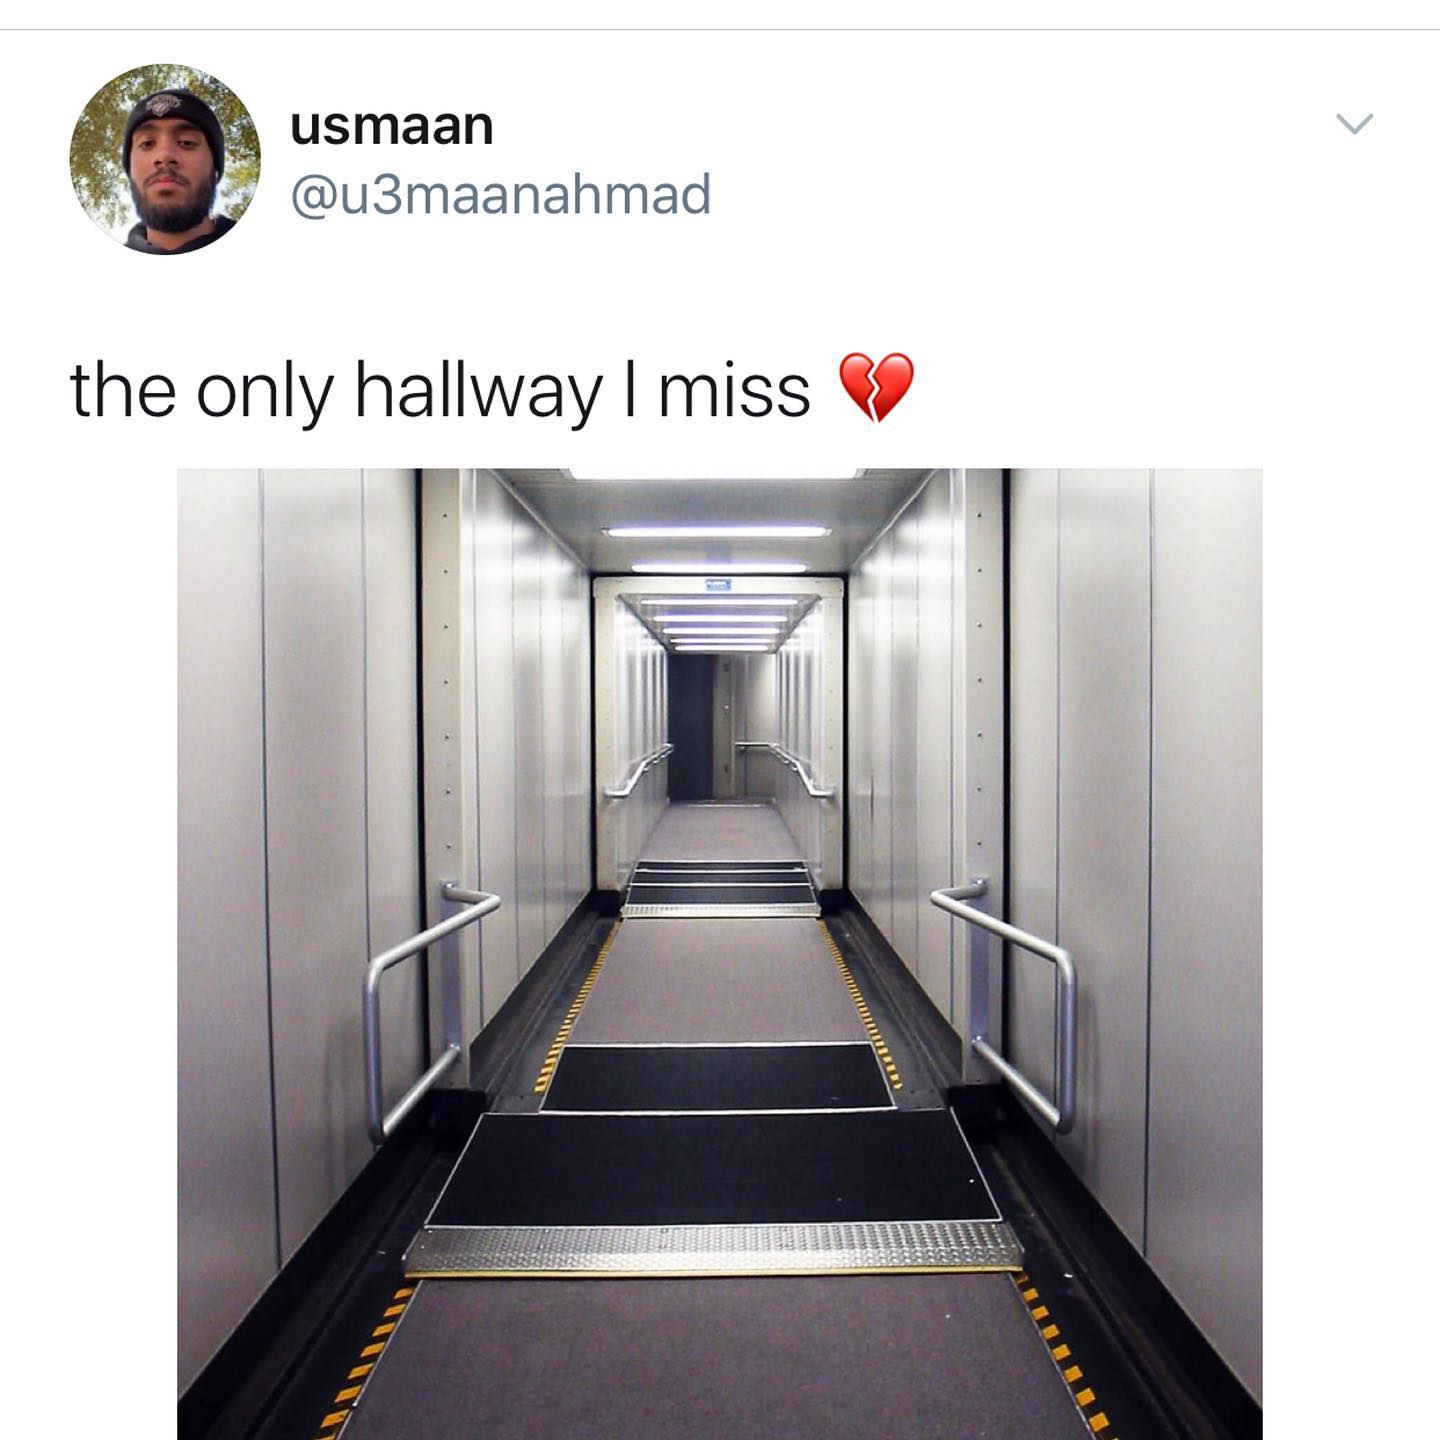 dank memes - twitter - only hallway i miss - usmaan the only hallway I miss